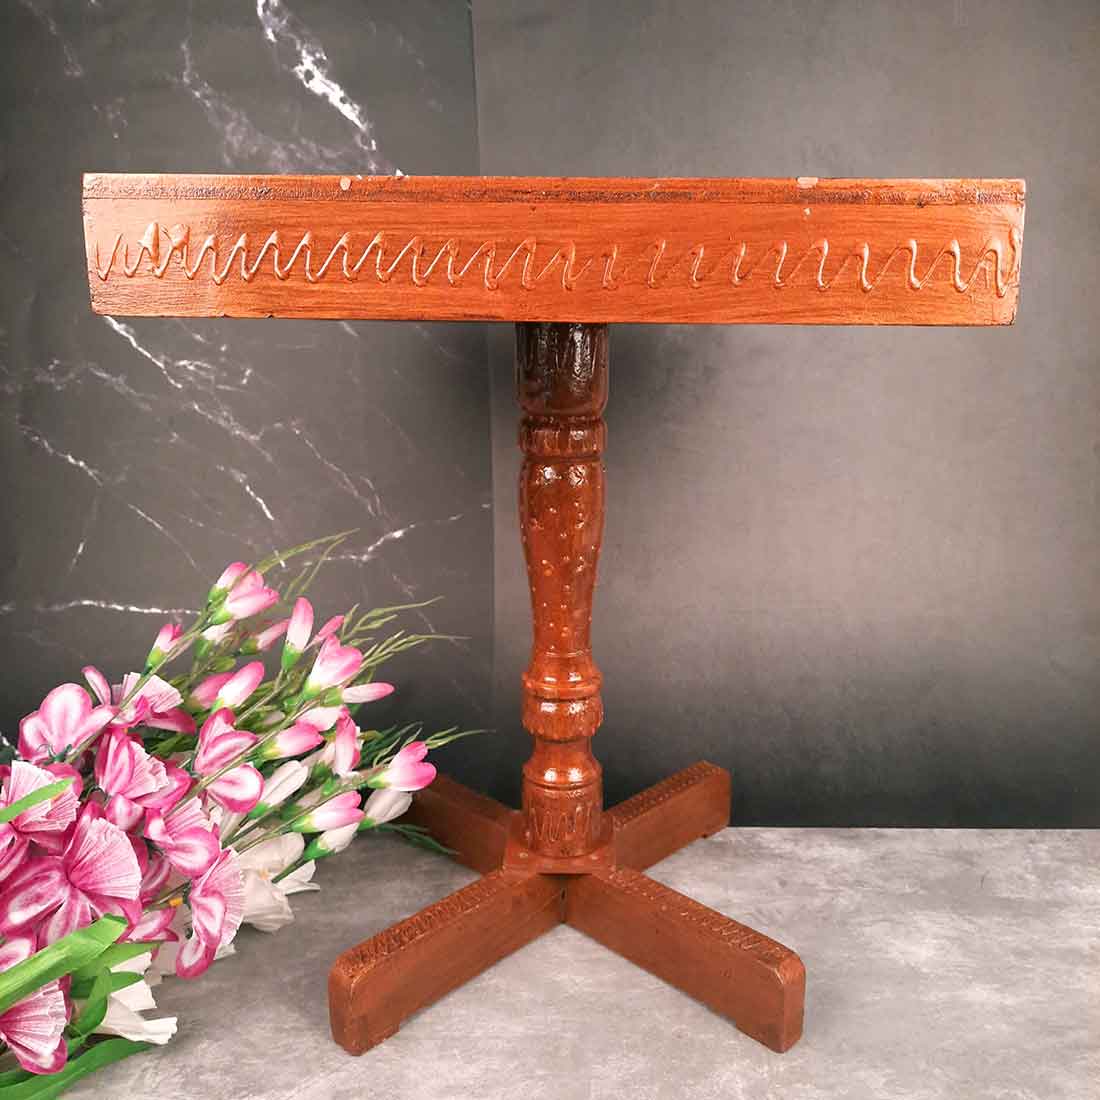 Side Table | Wooden End Tables Cum Stool - for Keeping Lamp, Vases & Plants | Small Stools - for Sitting, Bedside, Home Decor, Corners, Sofa Side Stool, Office & Gifts - 18 Inch